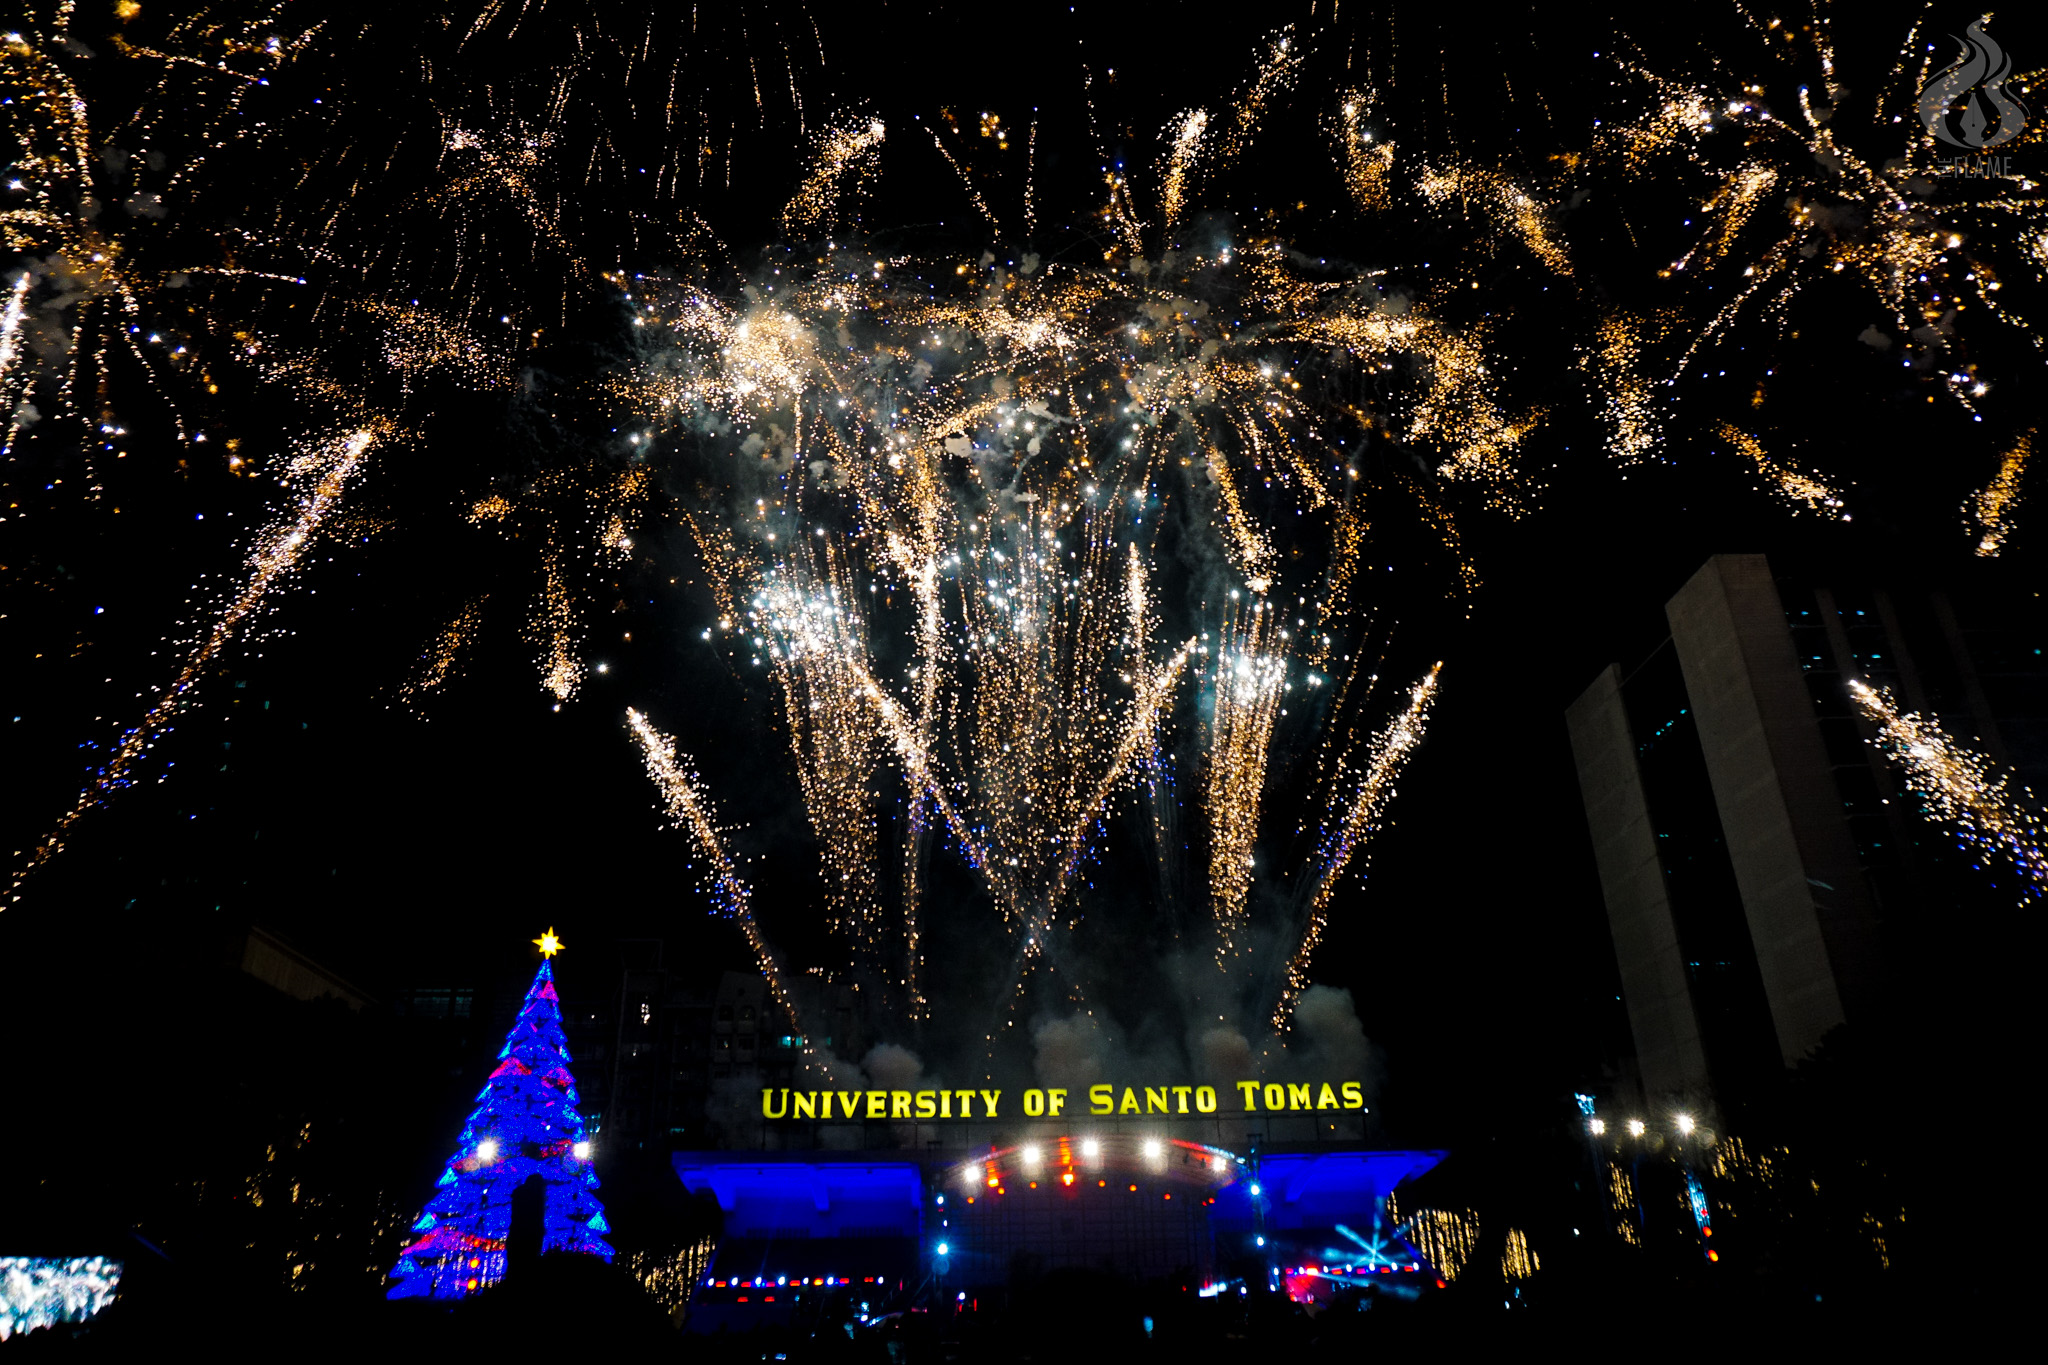 Thomasians reminisce, move forward during return of onsite Paskuhan